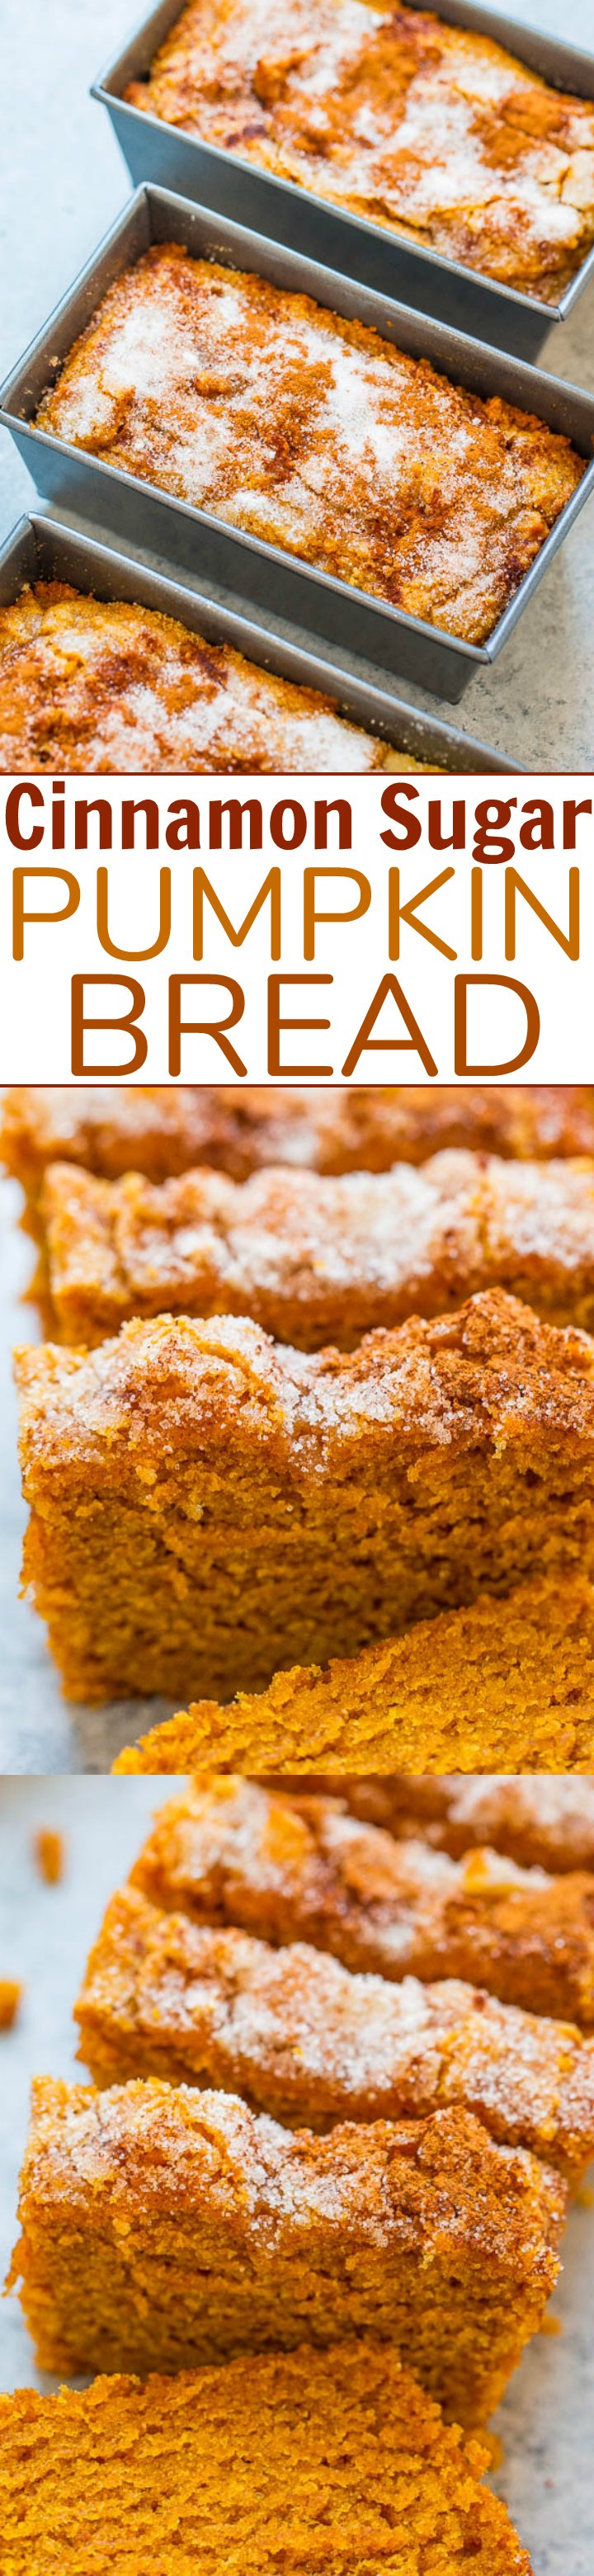  Cinnamon Sugar Pumpkin Bread - Super soft, tender, moist pumpkin bread with a slightly crunchy cinnamon sugar topping!! The MINI loaves are EASY, brimming will fall flavors, totally IRRESISTIBLE, and accidentally vegan!! 